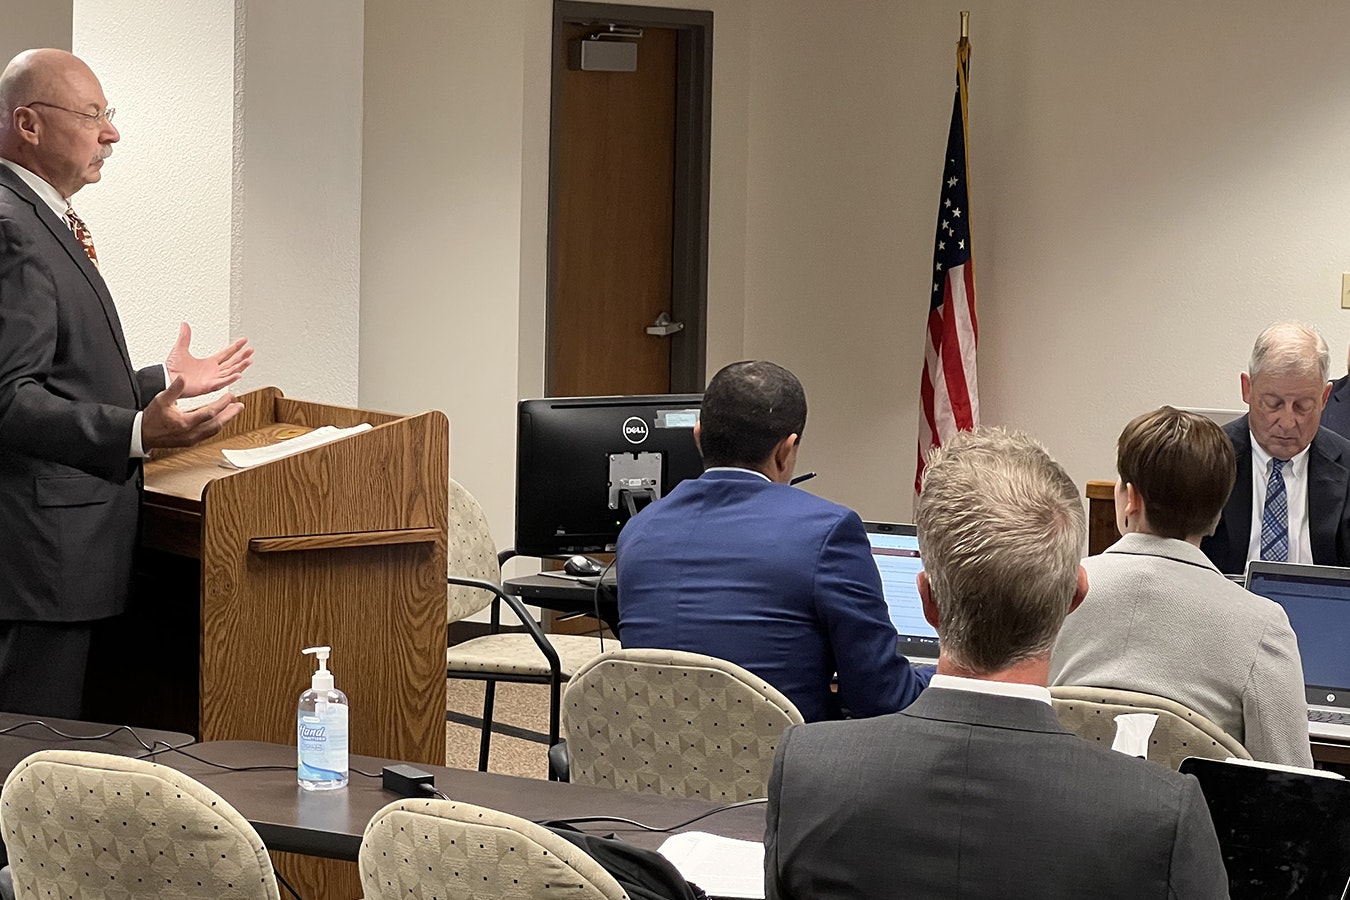 State Sen. Cale Case, R-Lander, testifies to the Wyoming Public Service Commission about proposed rate increases of nearly 30% by Rocky Mountain Power.